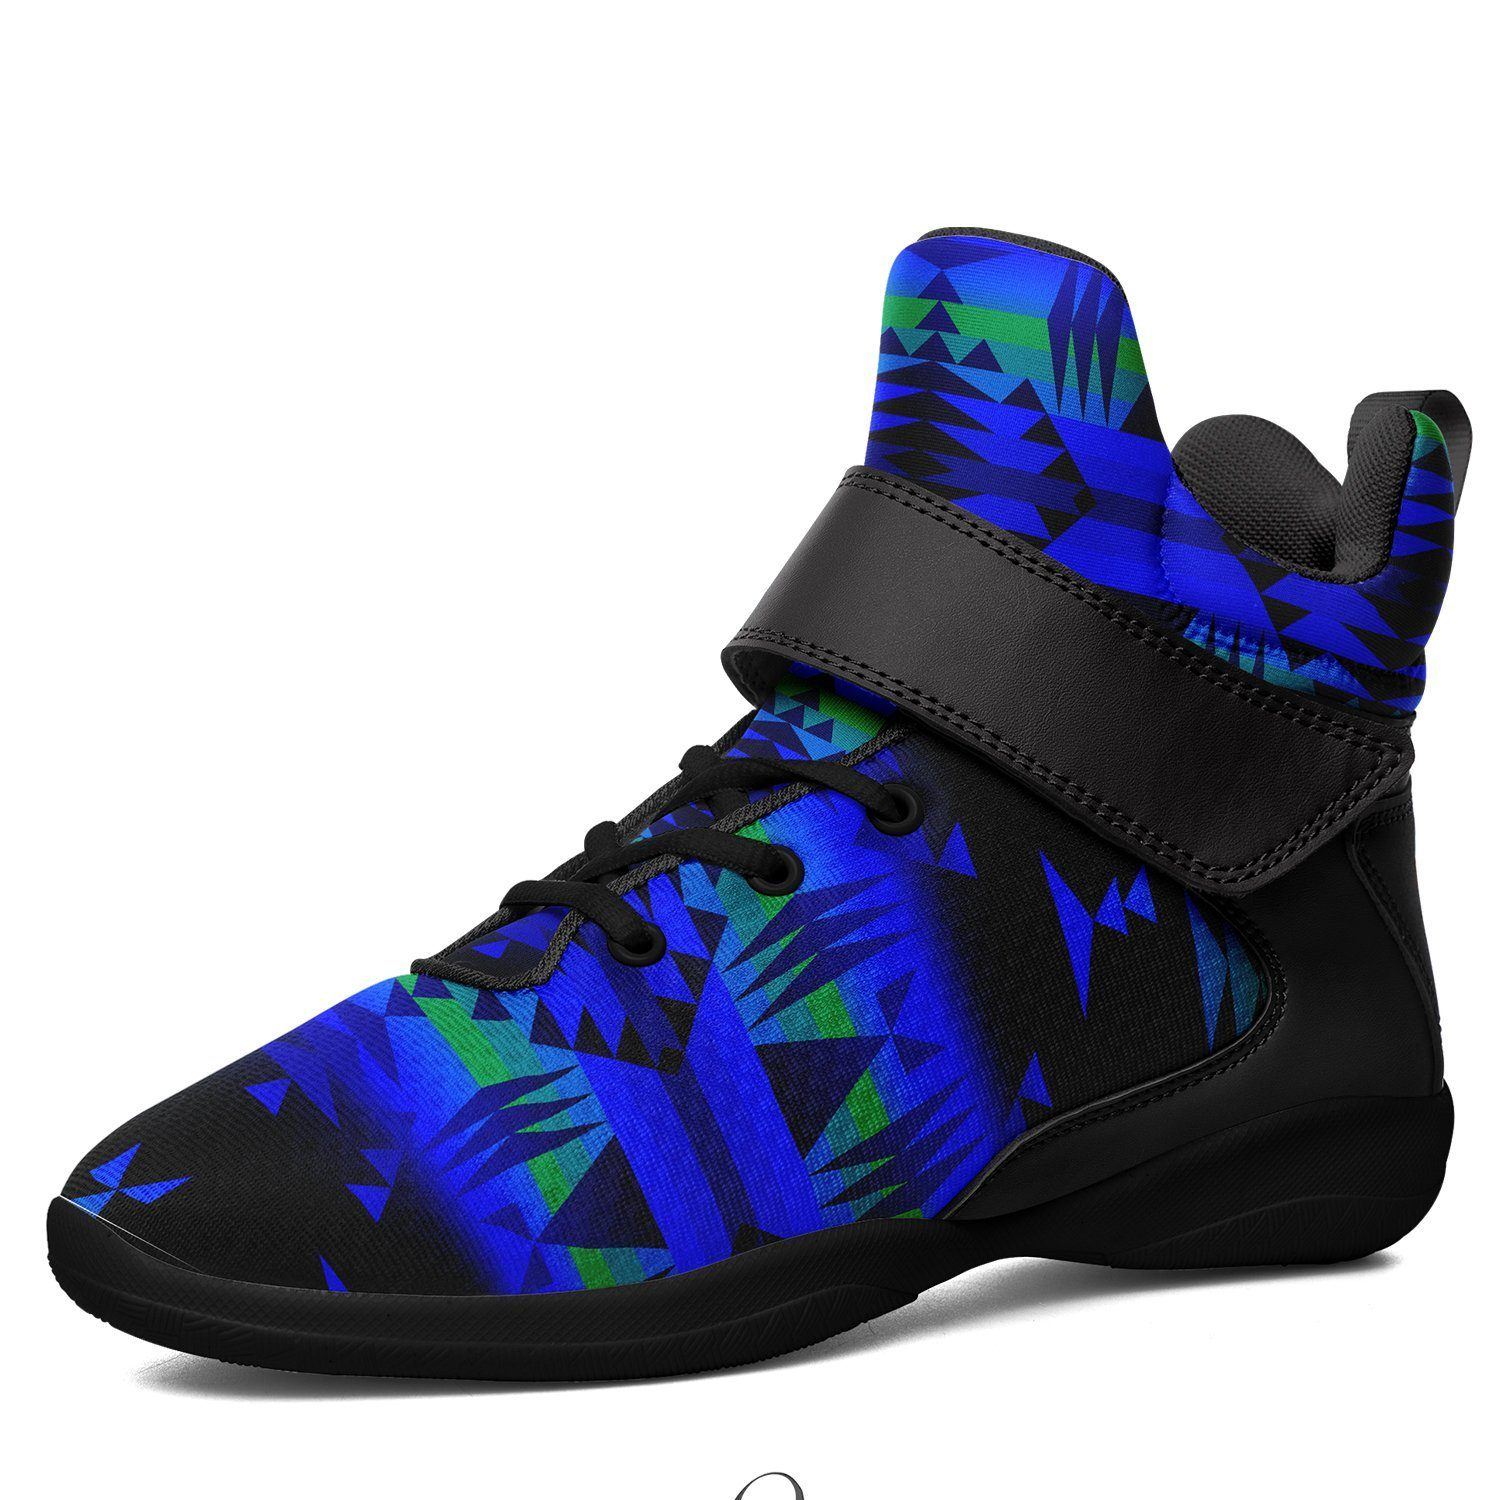 Between the Blue Ridge Mountains Ipottaa Basketball / Sport High Top Shoes - Black Sole 49 Dzine US Men 7 / EUR 40 Black Sole with Black Strap 